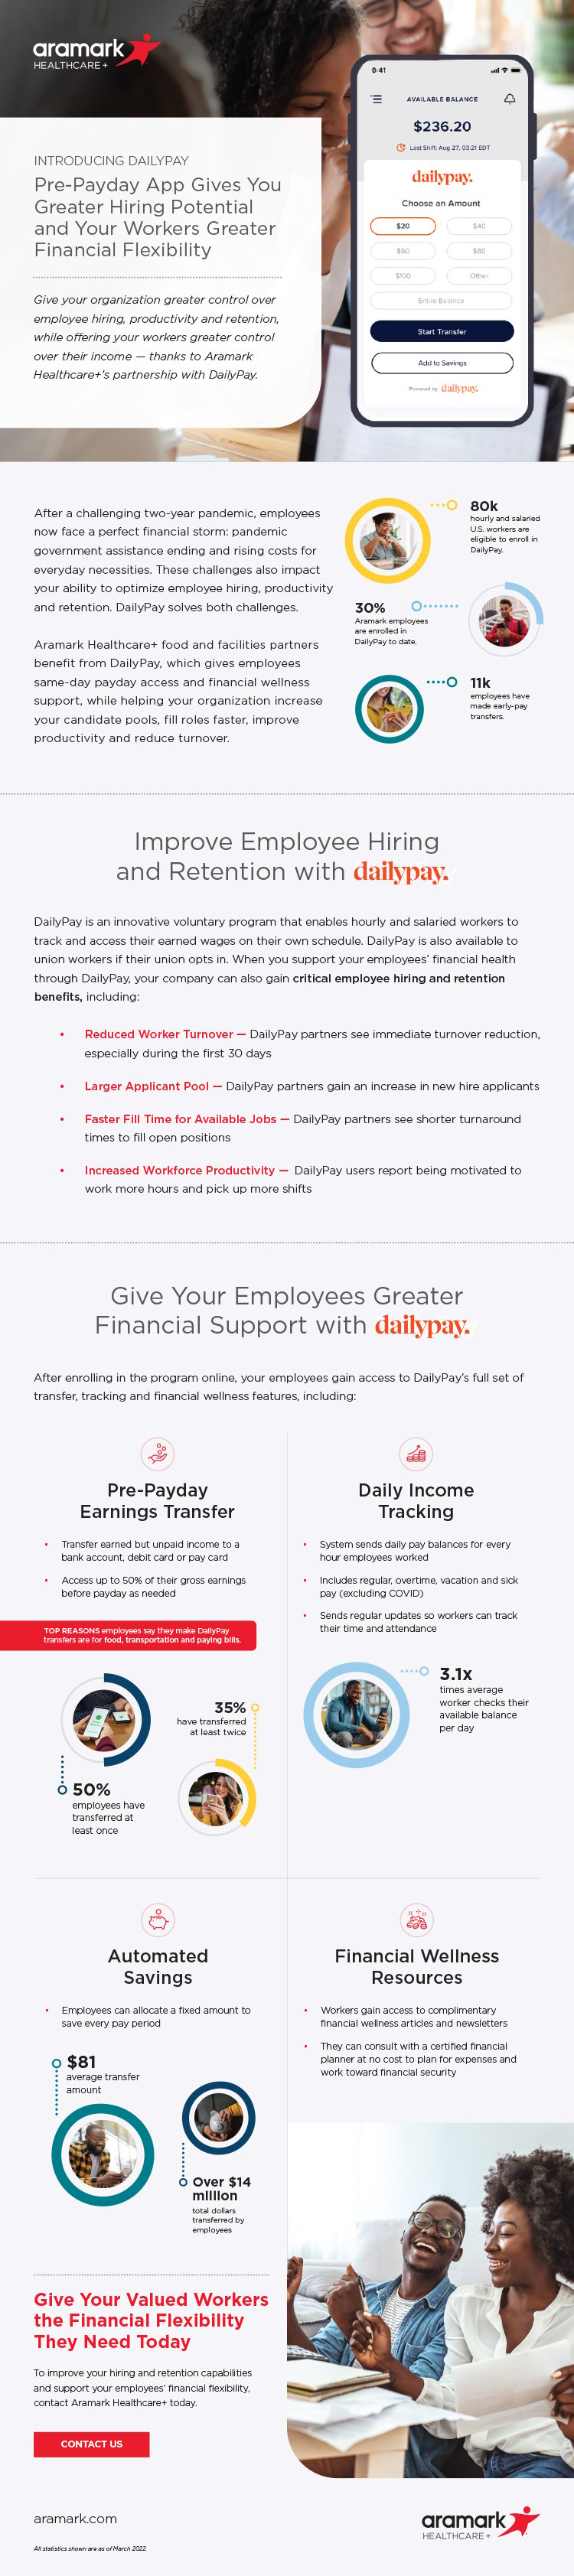 DailyPay_HC_Infographic